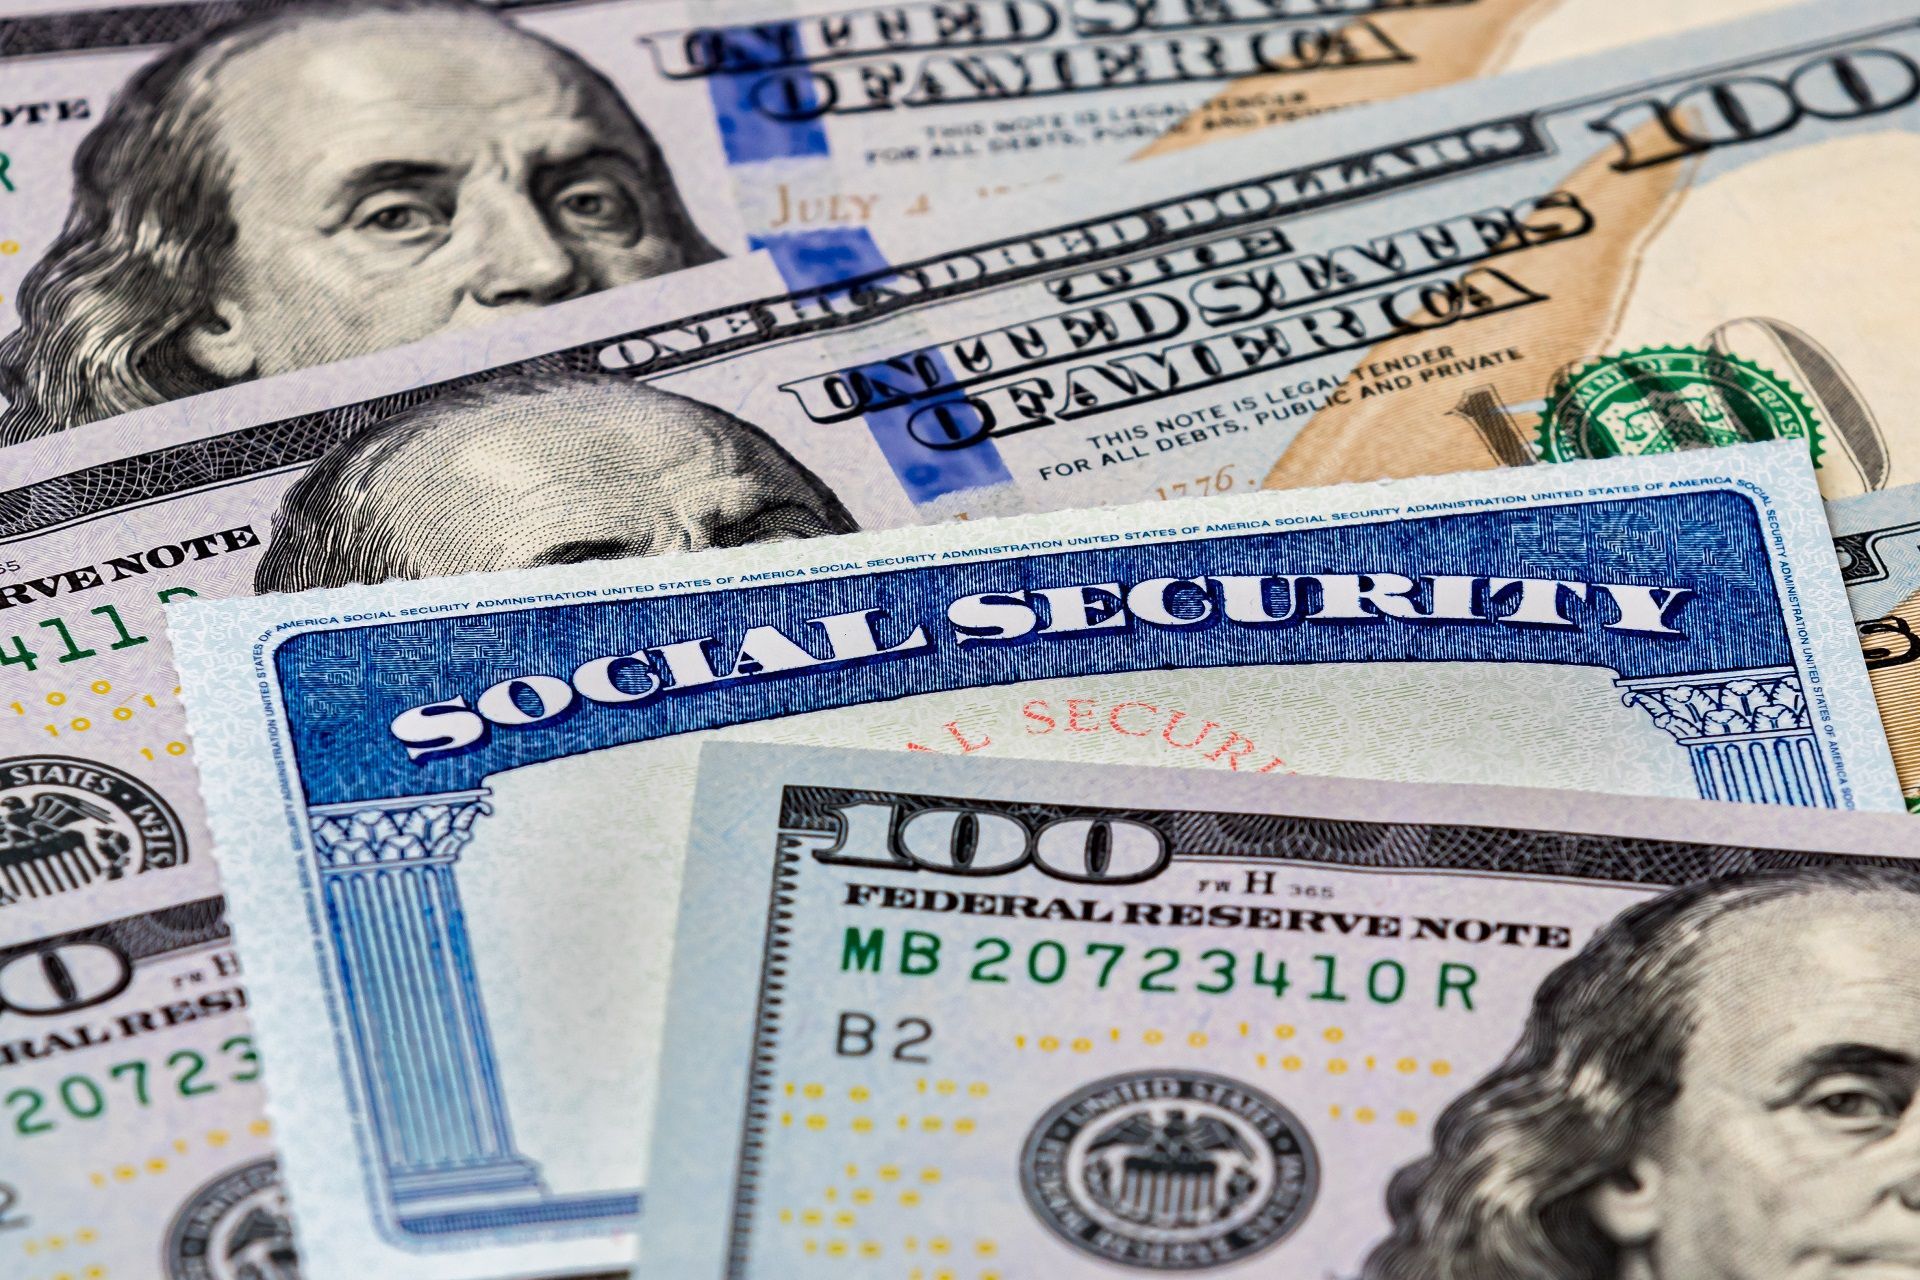 How Does a Lump Sum Settlement Affect Social Security Disability?